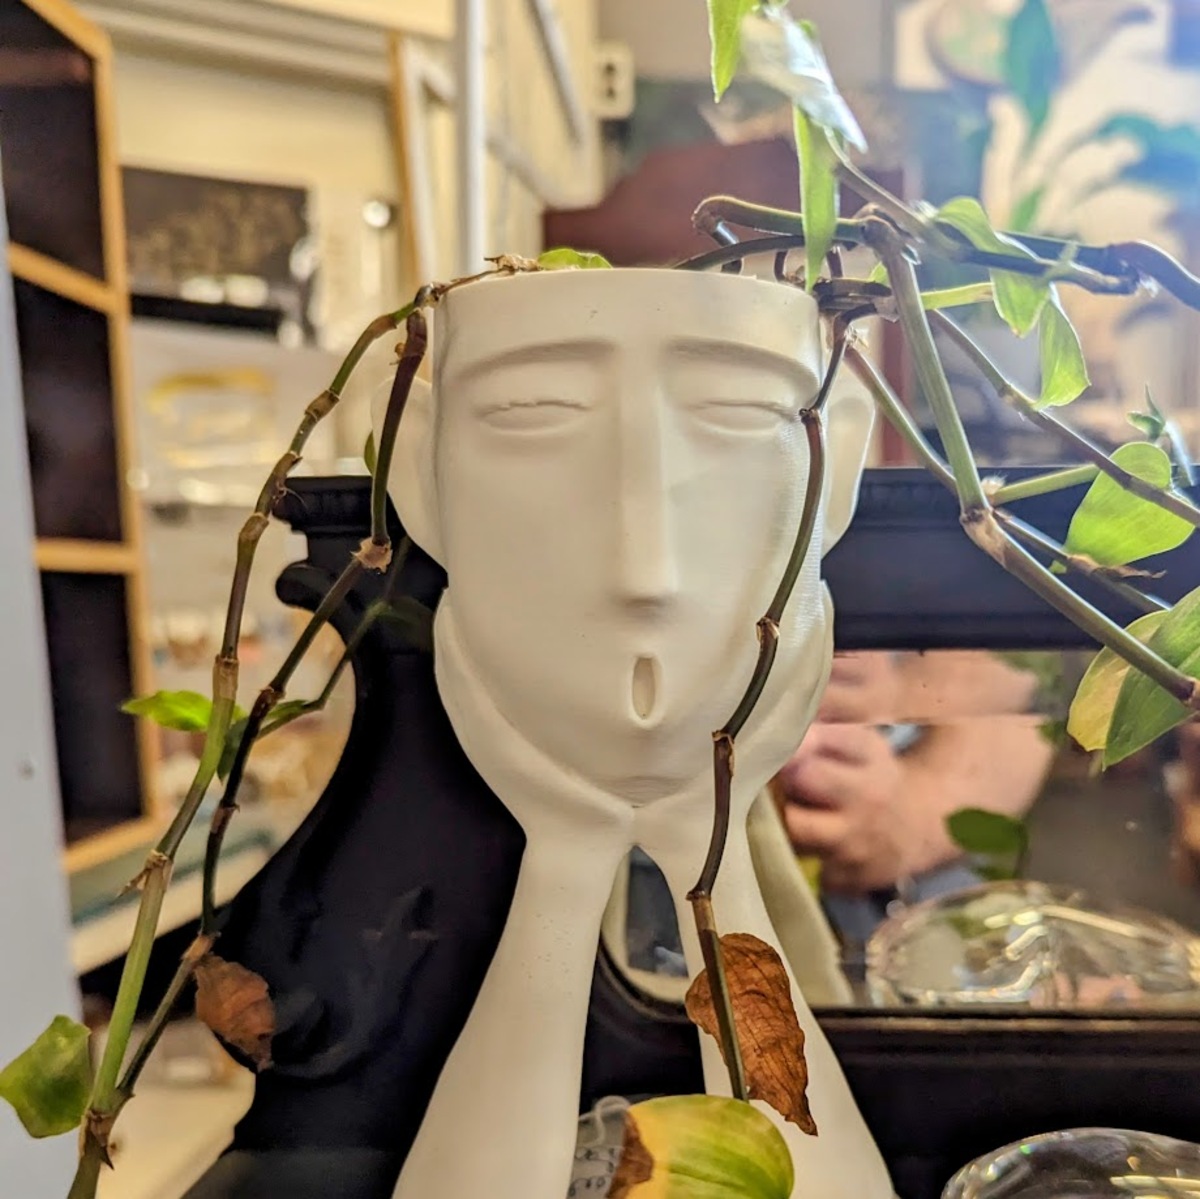 A white porcelain vase in the shape of a thin human face proped up on arms, its mouth puckered. A tiny plant and its tendrals hang down resebling bangs.